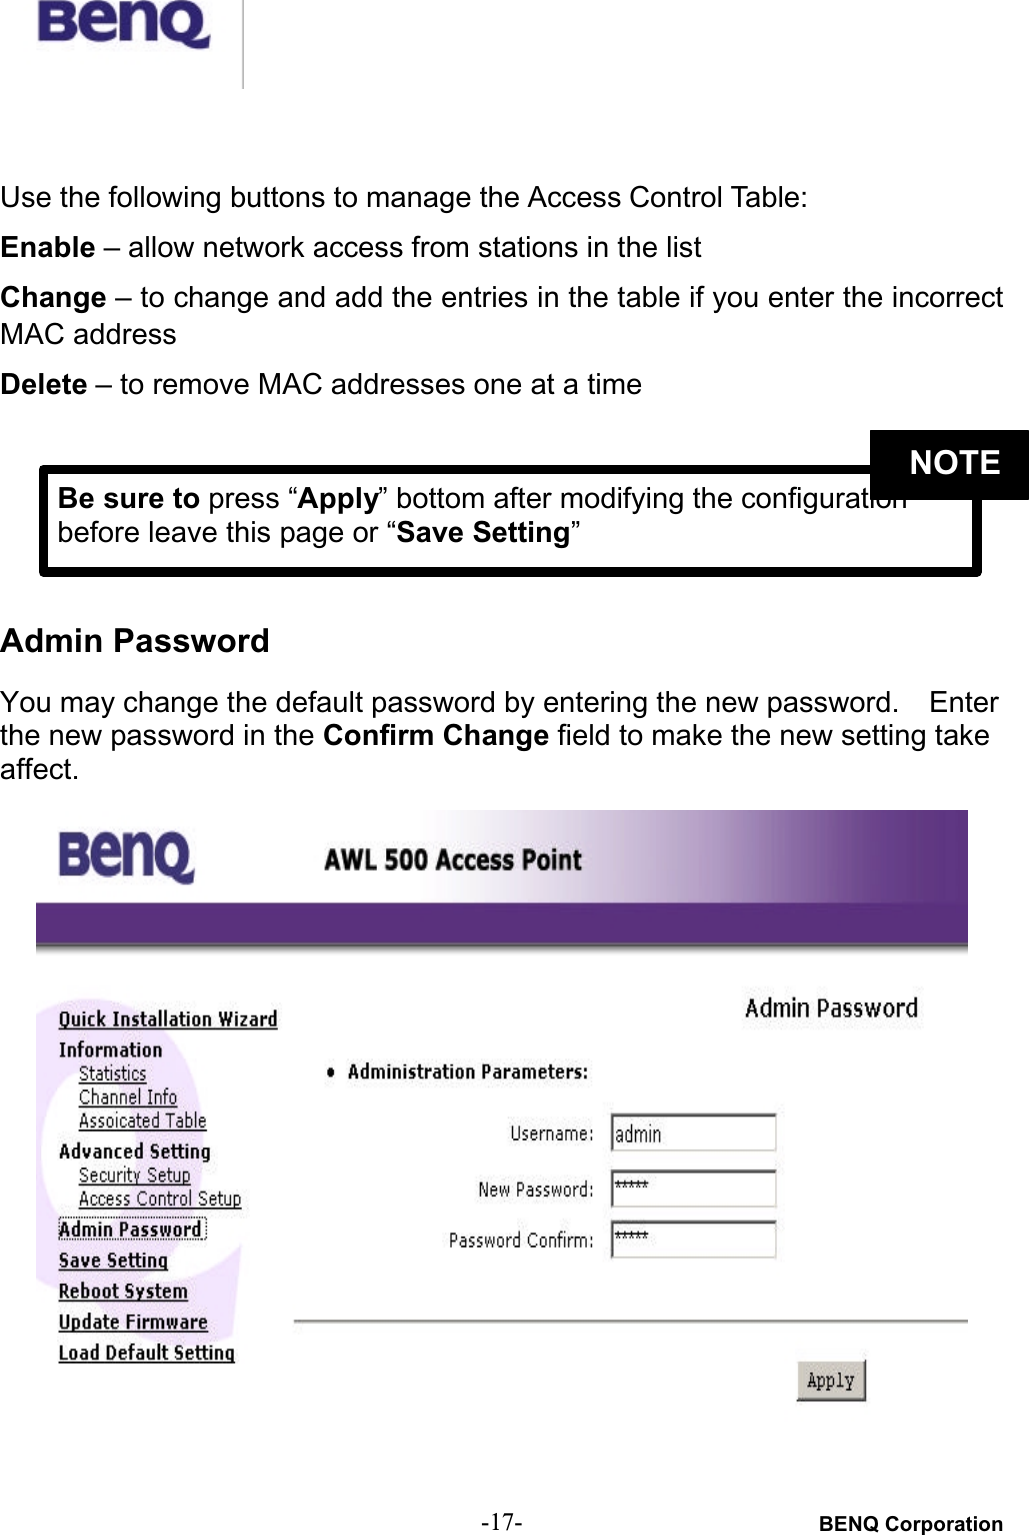 BENQ Corporation-17-Use the following buttons to manage the Access Control Table:Enable – allow network access from stations in the listChange – to change and add the entries in the table if you enter the incorrect MAC addressDelete – to remove MAC addresses one at a timeAdmin PasswordYou may change the default password by entering the new password.    Enterthe new password in the Confirm Change field to make the new setting take affect.Be sure to press “Apply” bottom after modifying the configuration before leave this page or “Save Setting”NOTE